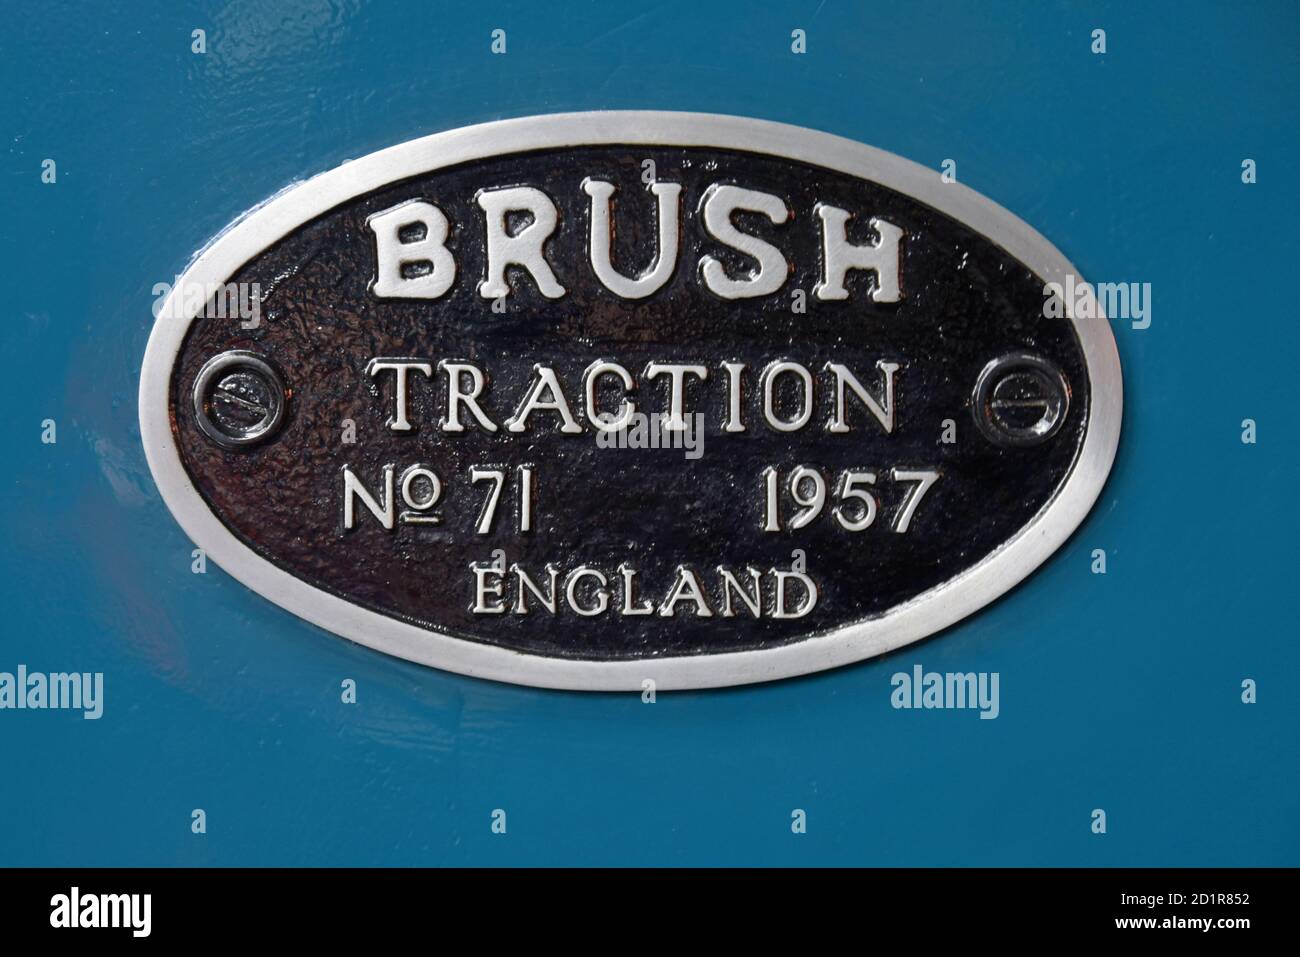 Maker's plate by Brush Traction on  a Class 31 diesel locomotive at the National Railway Museum, York, UK Stock Photo